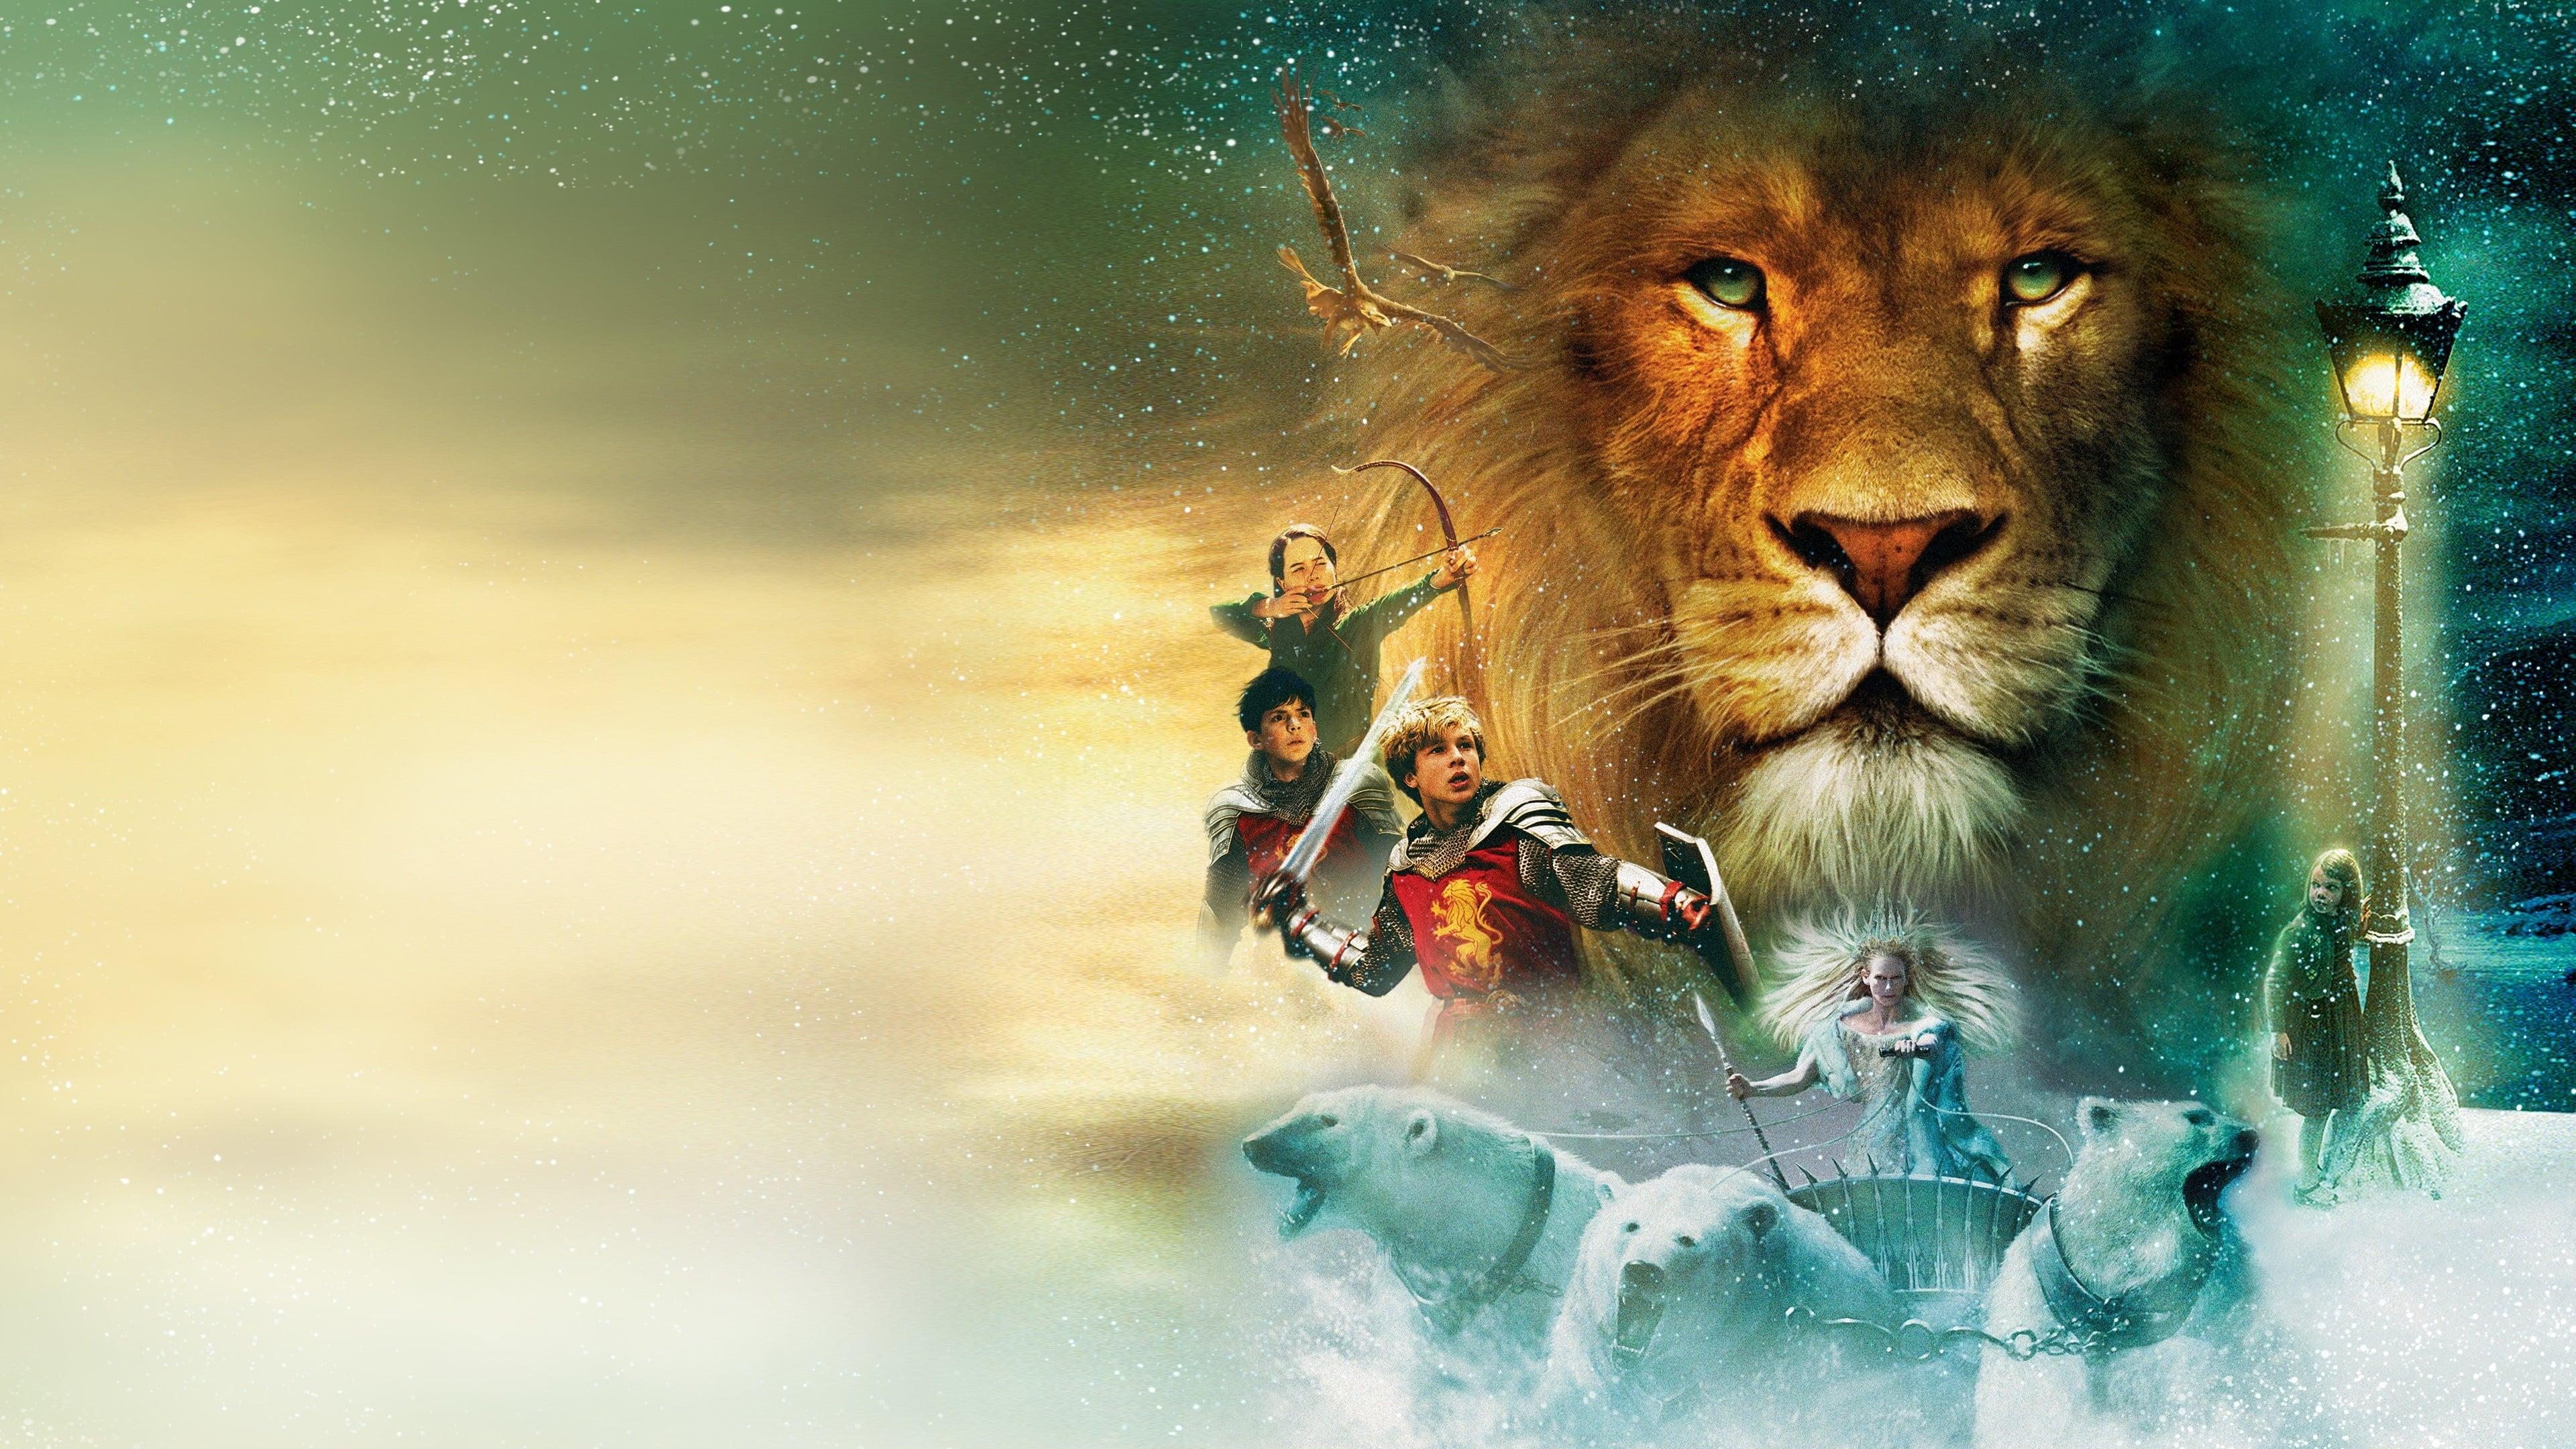 The Chronicles of Narnia: The Lion, the Witch and the Wardrobe backdrop